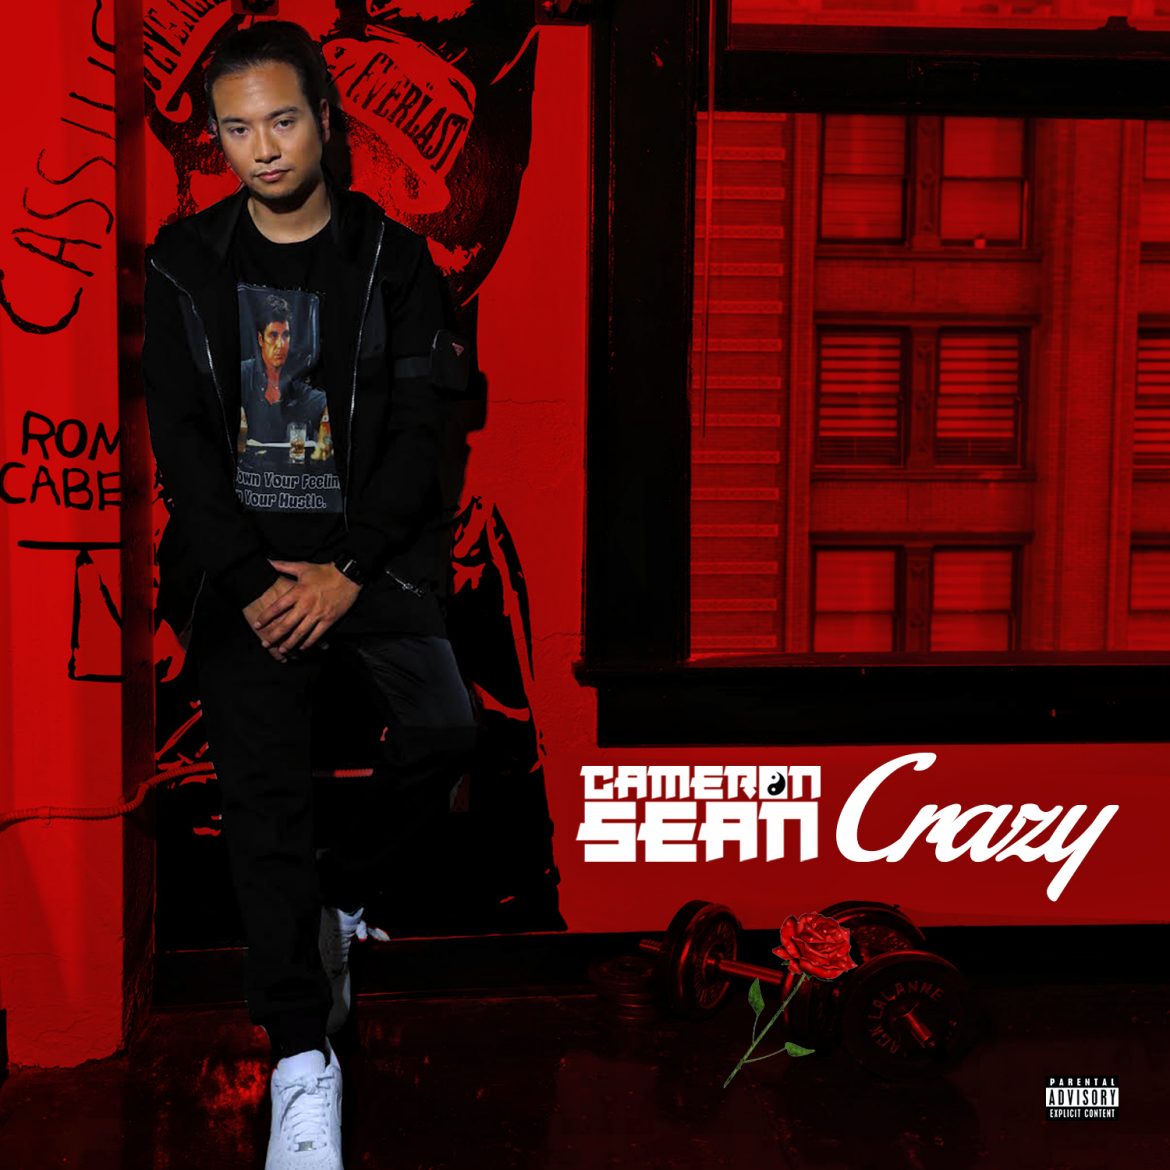 With a new school hip-hop vibe and his own lyrical elements from old school, ‘Cameron Sean’ unveils new single ‘Crazy’.